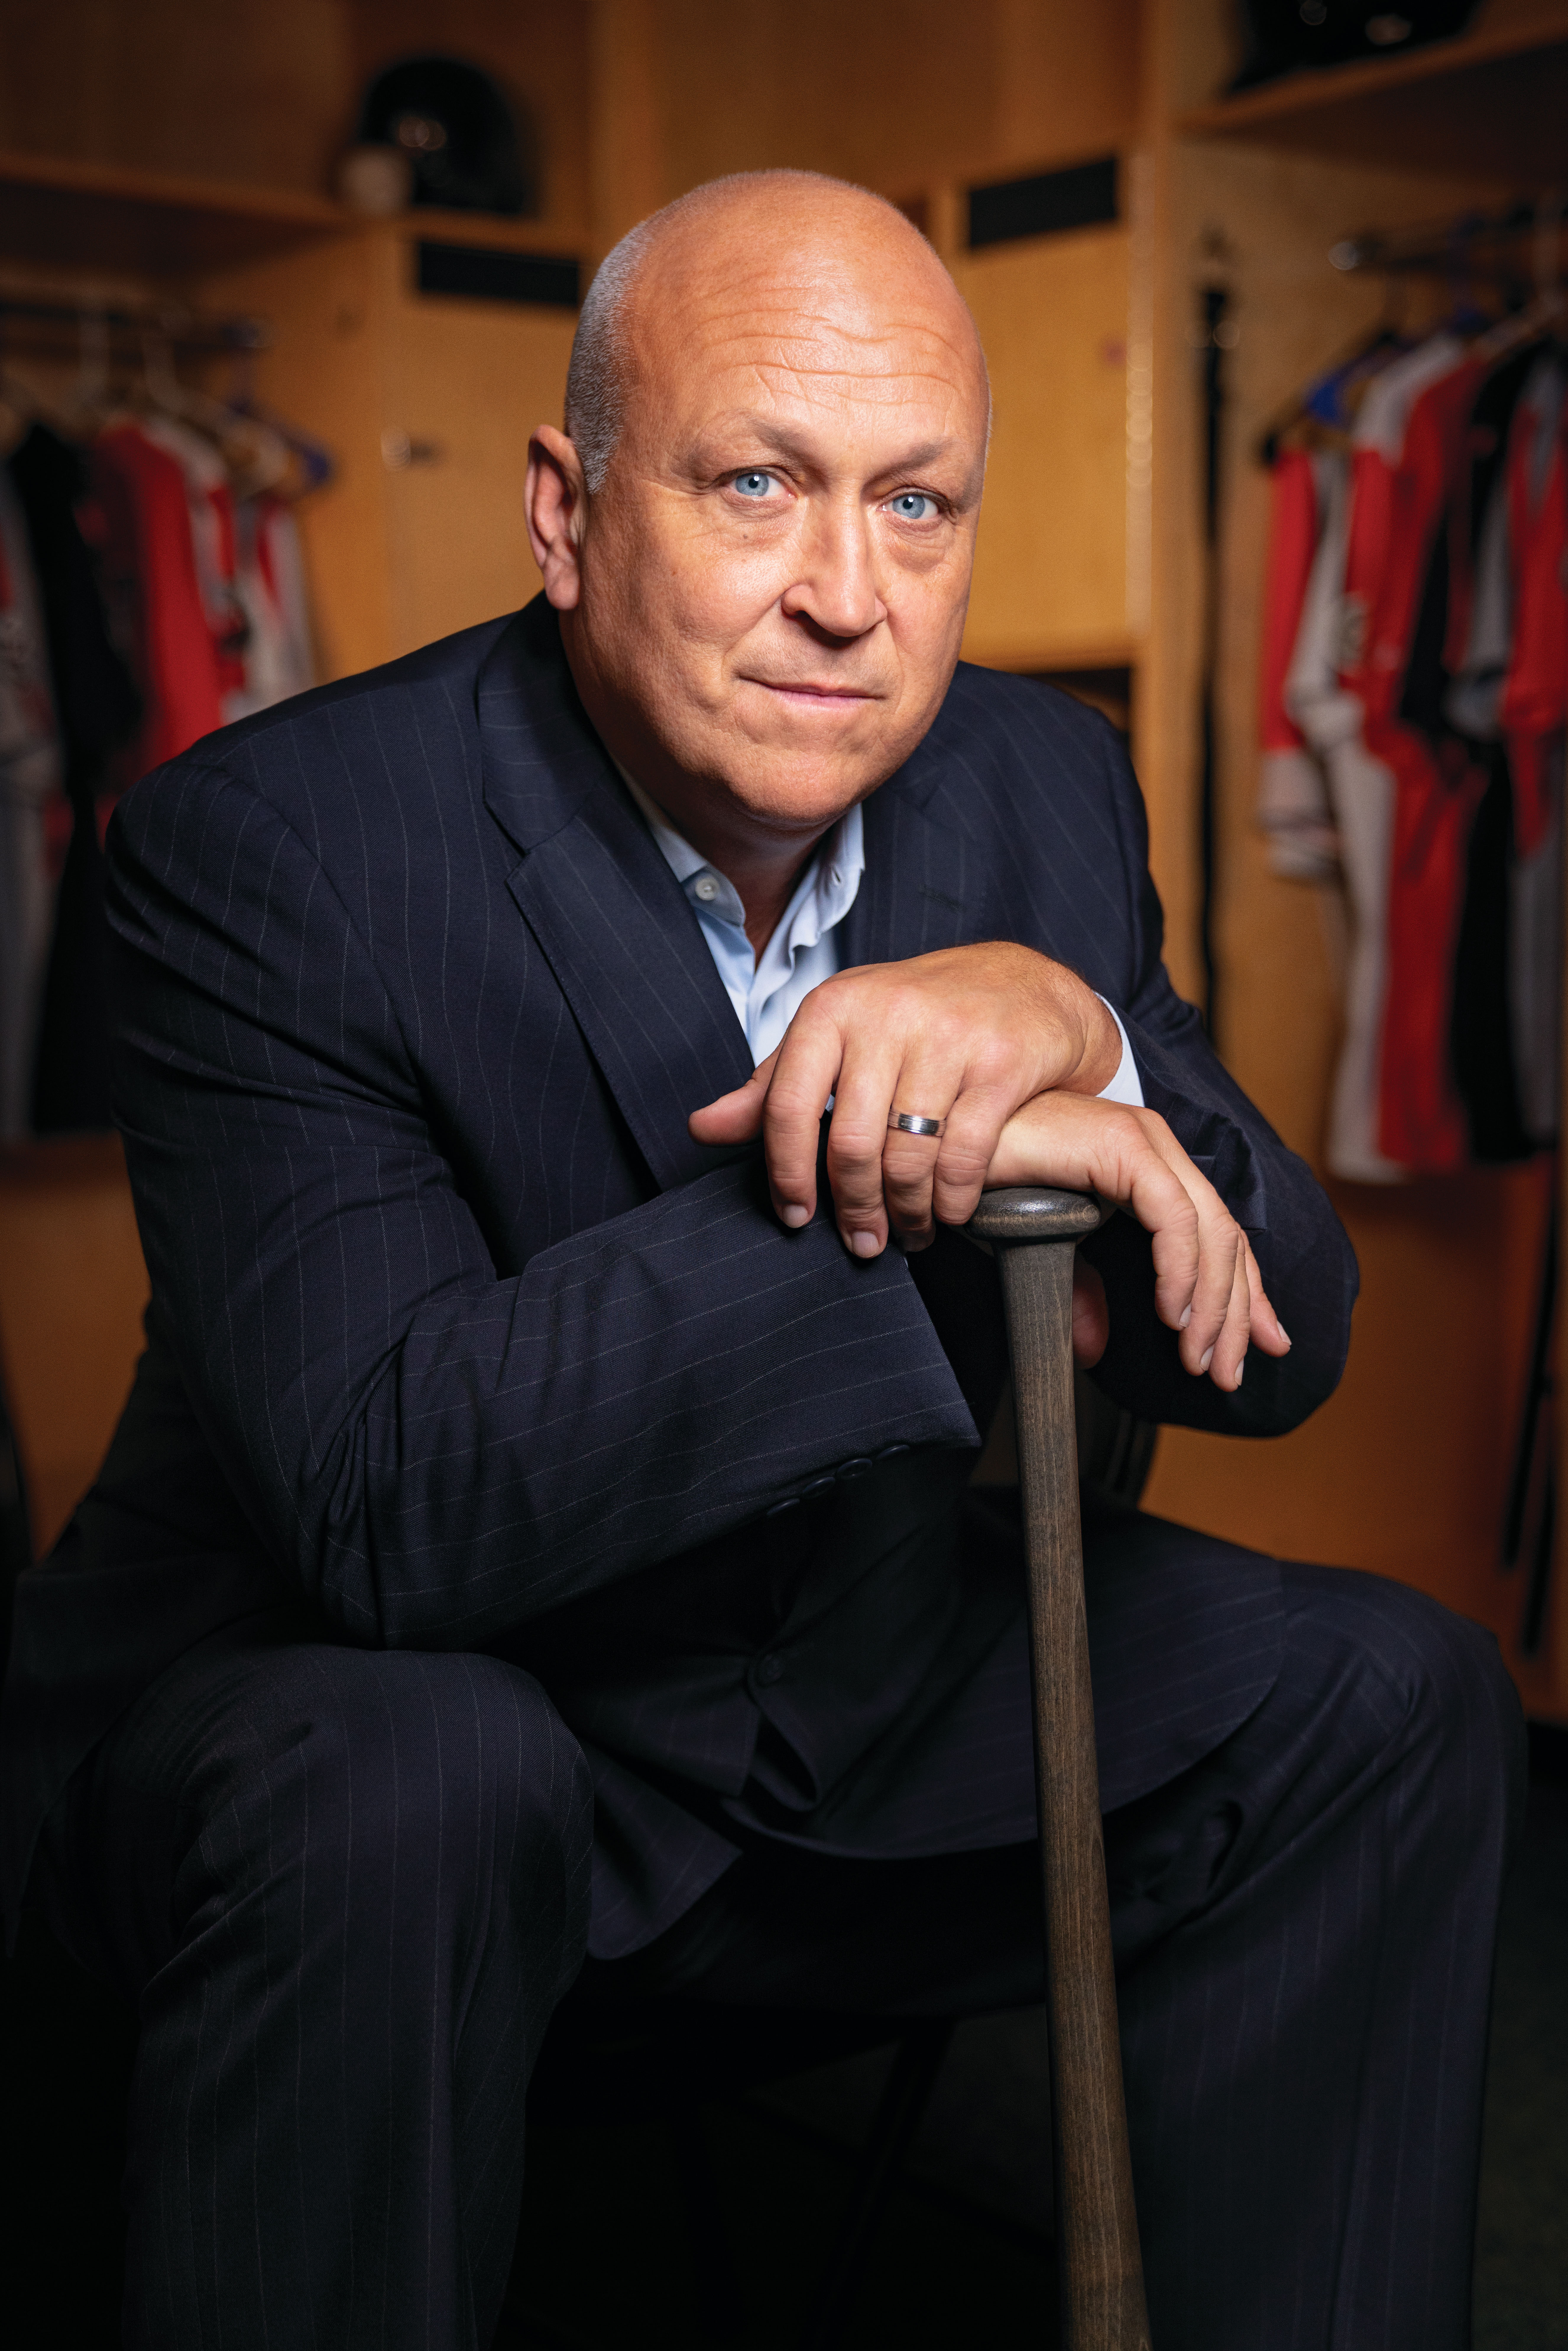 Cal Ripken, Jr., will be the keynote speaker at the 2019 NRPA Annual Conference opening general session, Tuesday, Sept. 24, 2019.